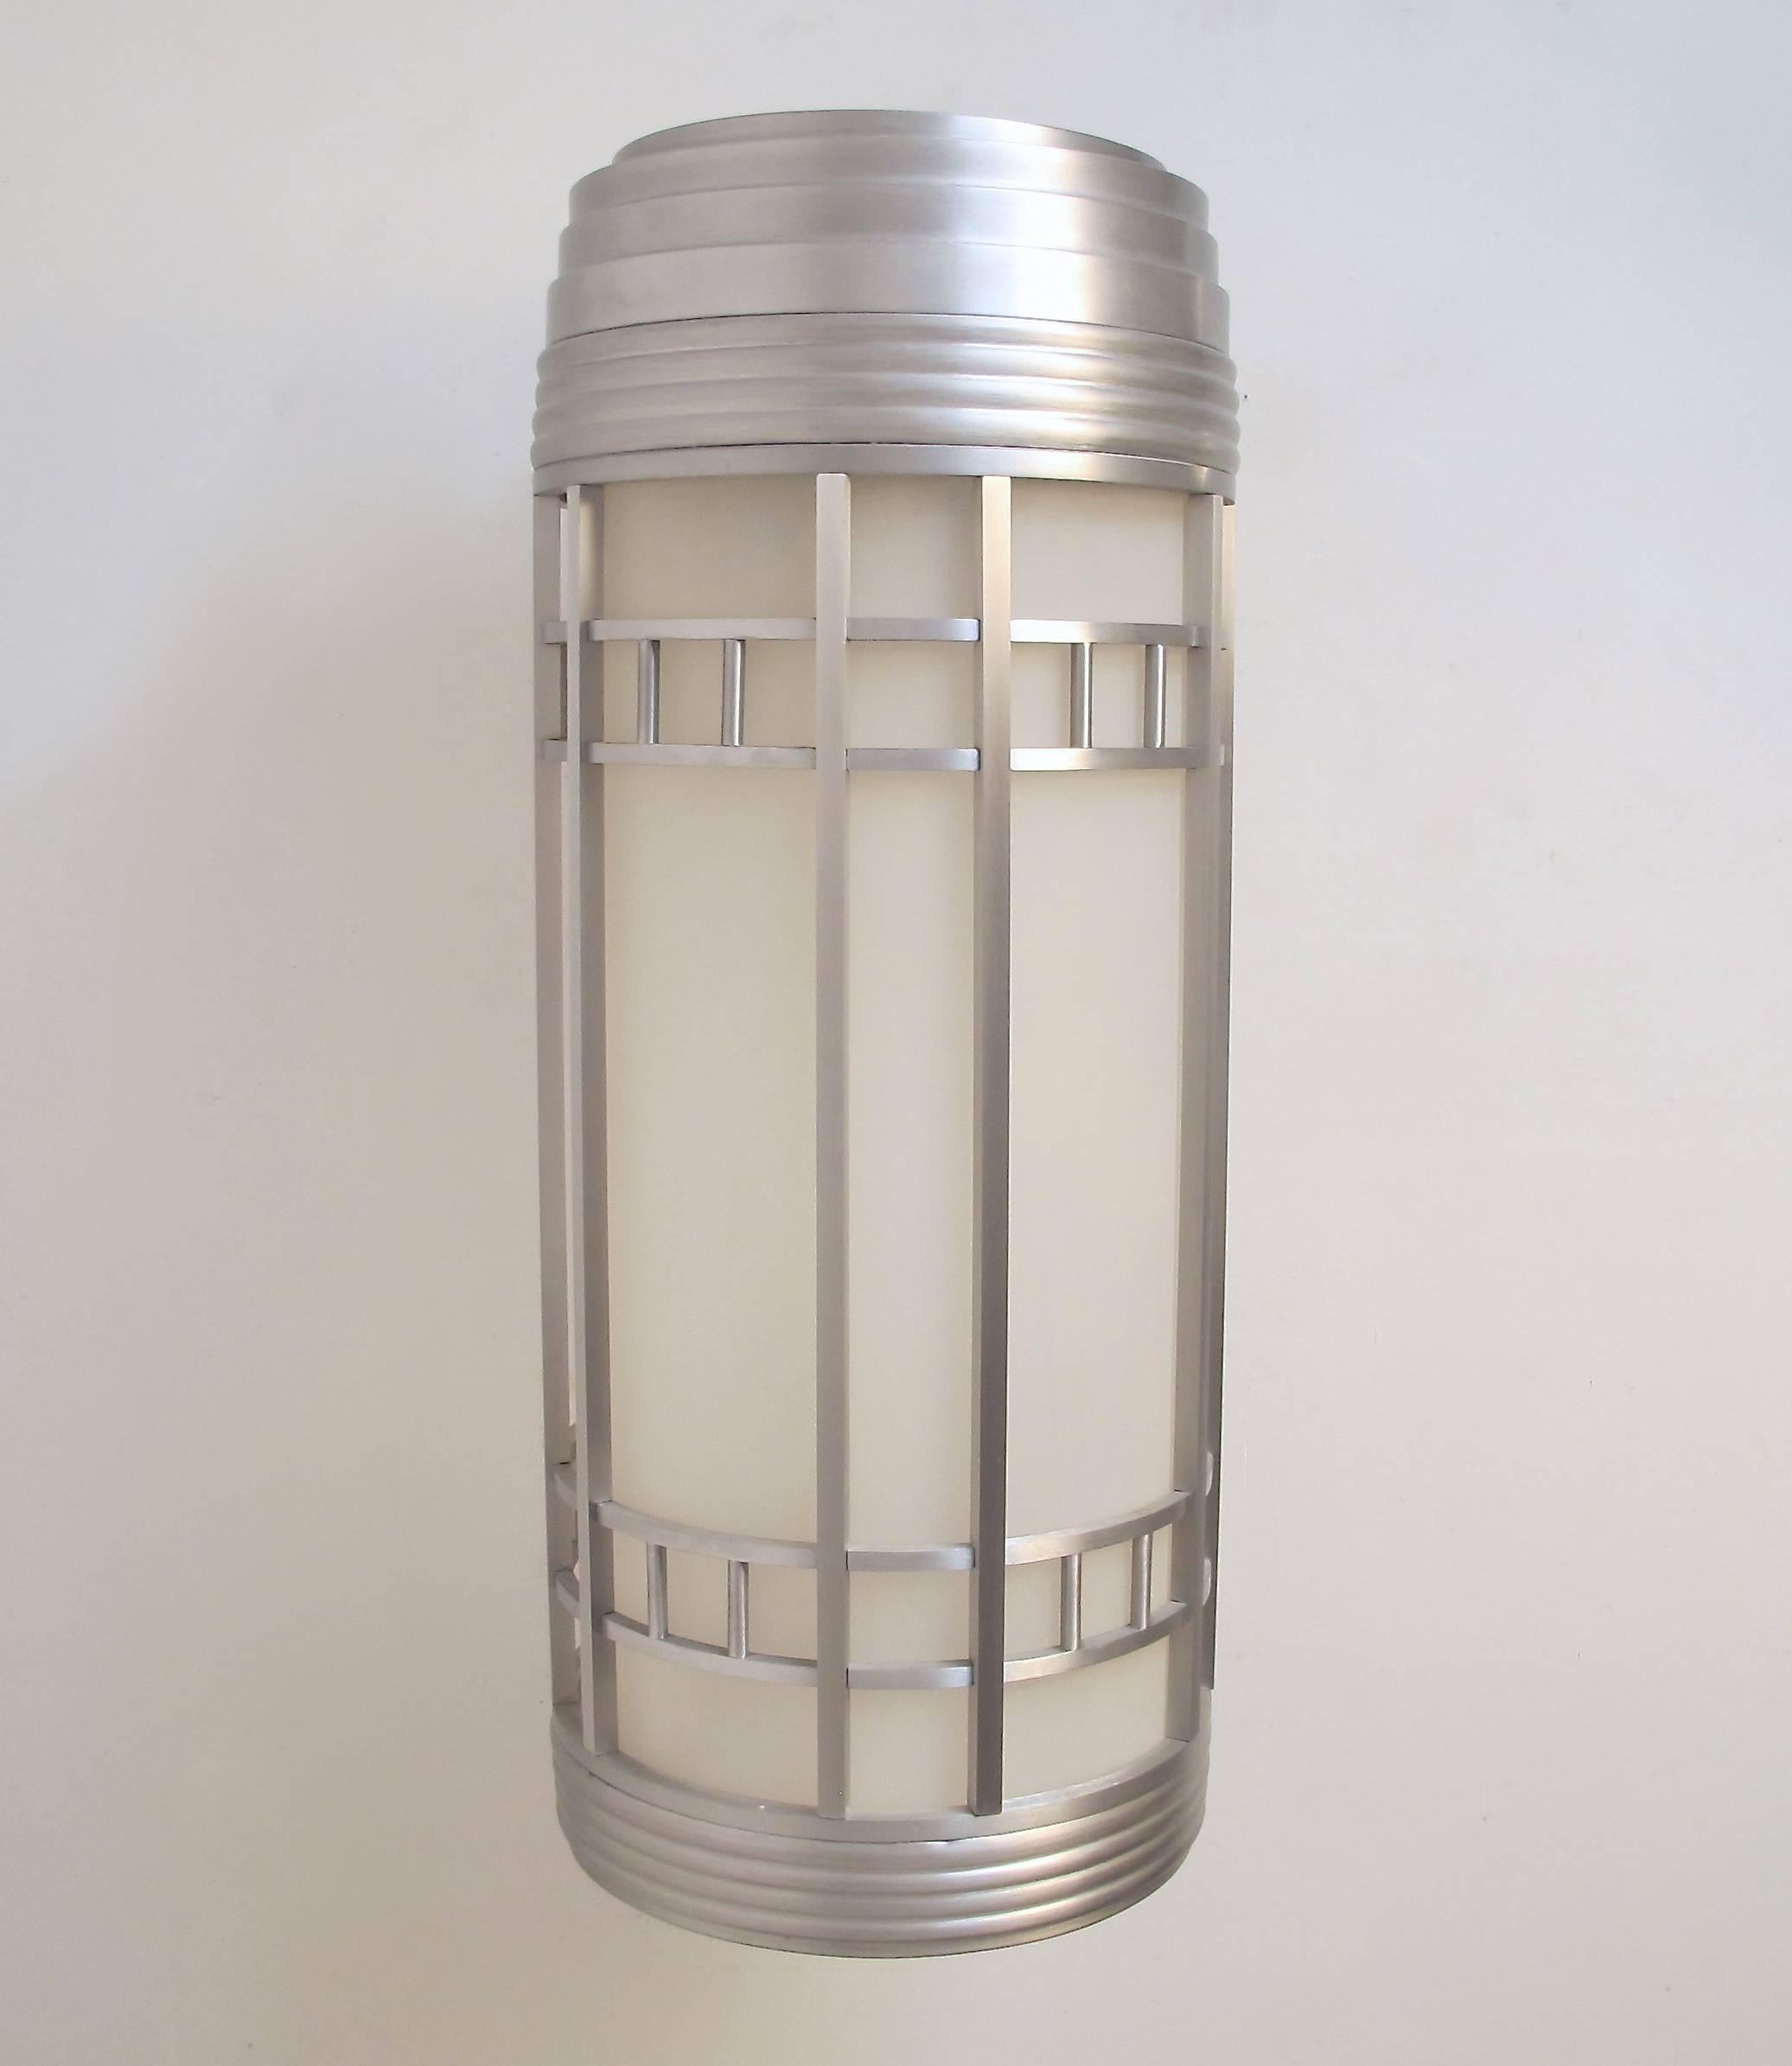 Commercial size Art Deco or Streamlined Moderne style lantern wall sconces. Aluminum body with opaque white lexan insert. Light fixtures have been completely reconditioned and re-wired. American, 1930s-1940s.